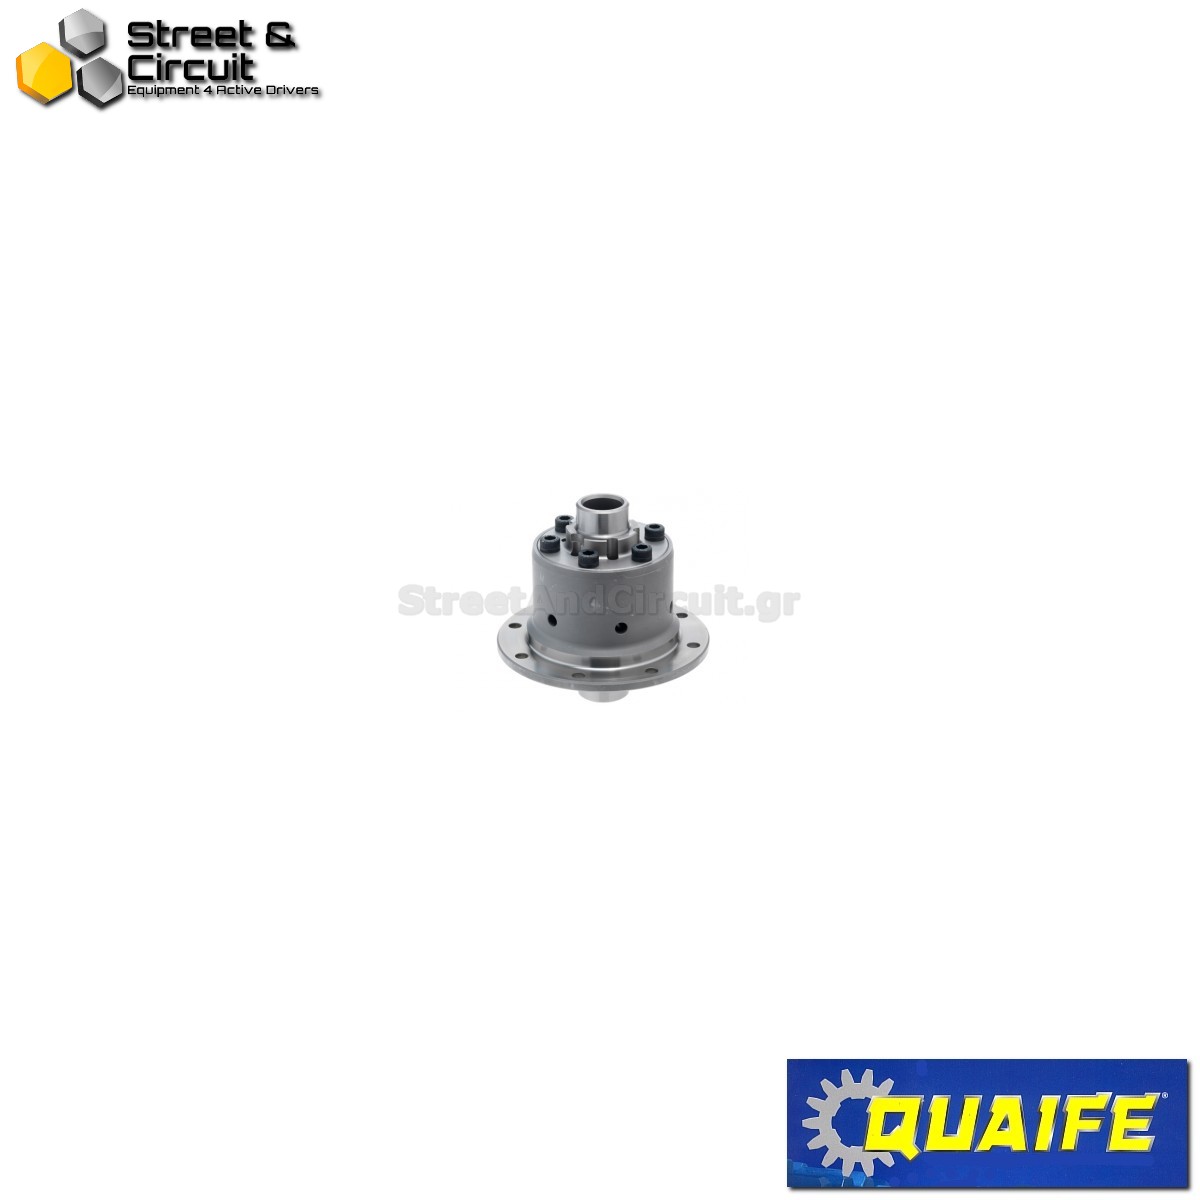 Ford Explorer 4WD front Quaife ATB Μπλοκέ Διαφορικό/Limited Slip Diff